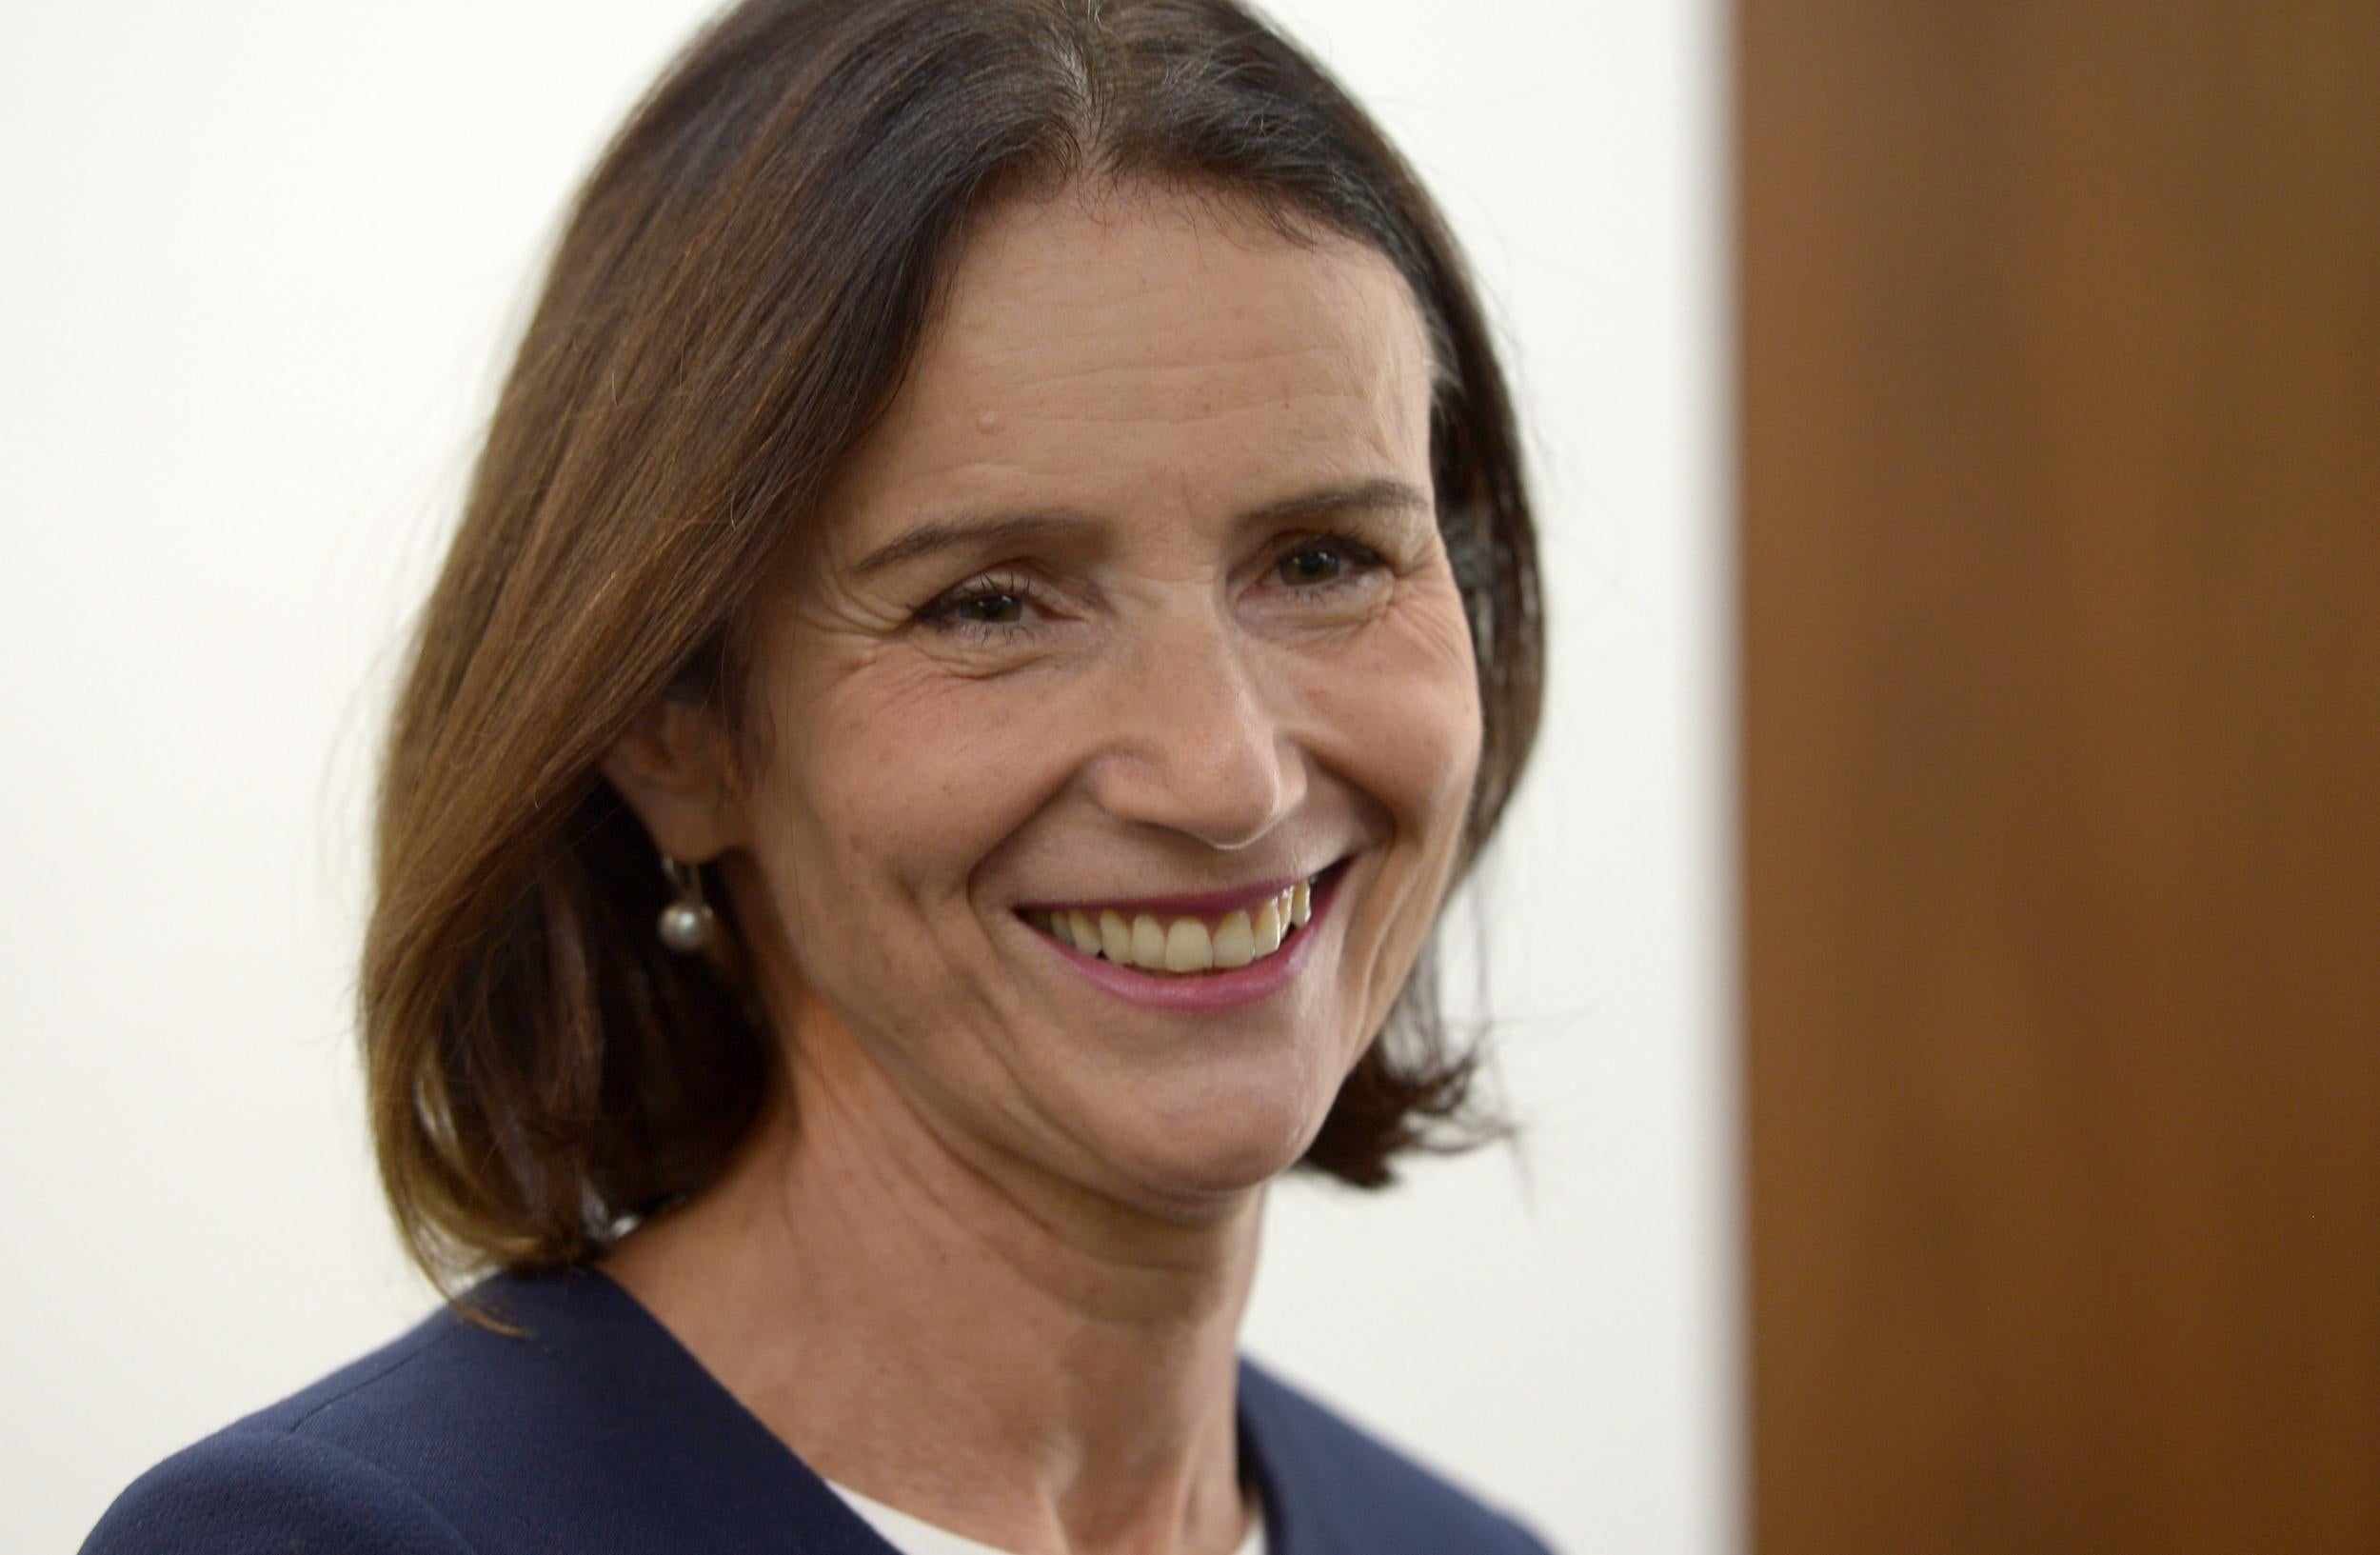 Businesses across Europe want the closest possible economic relationship post-Brexit, Carolyn Fairbairn, director general of the Confederation of British Industry will say